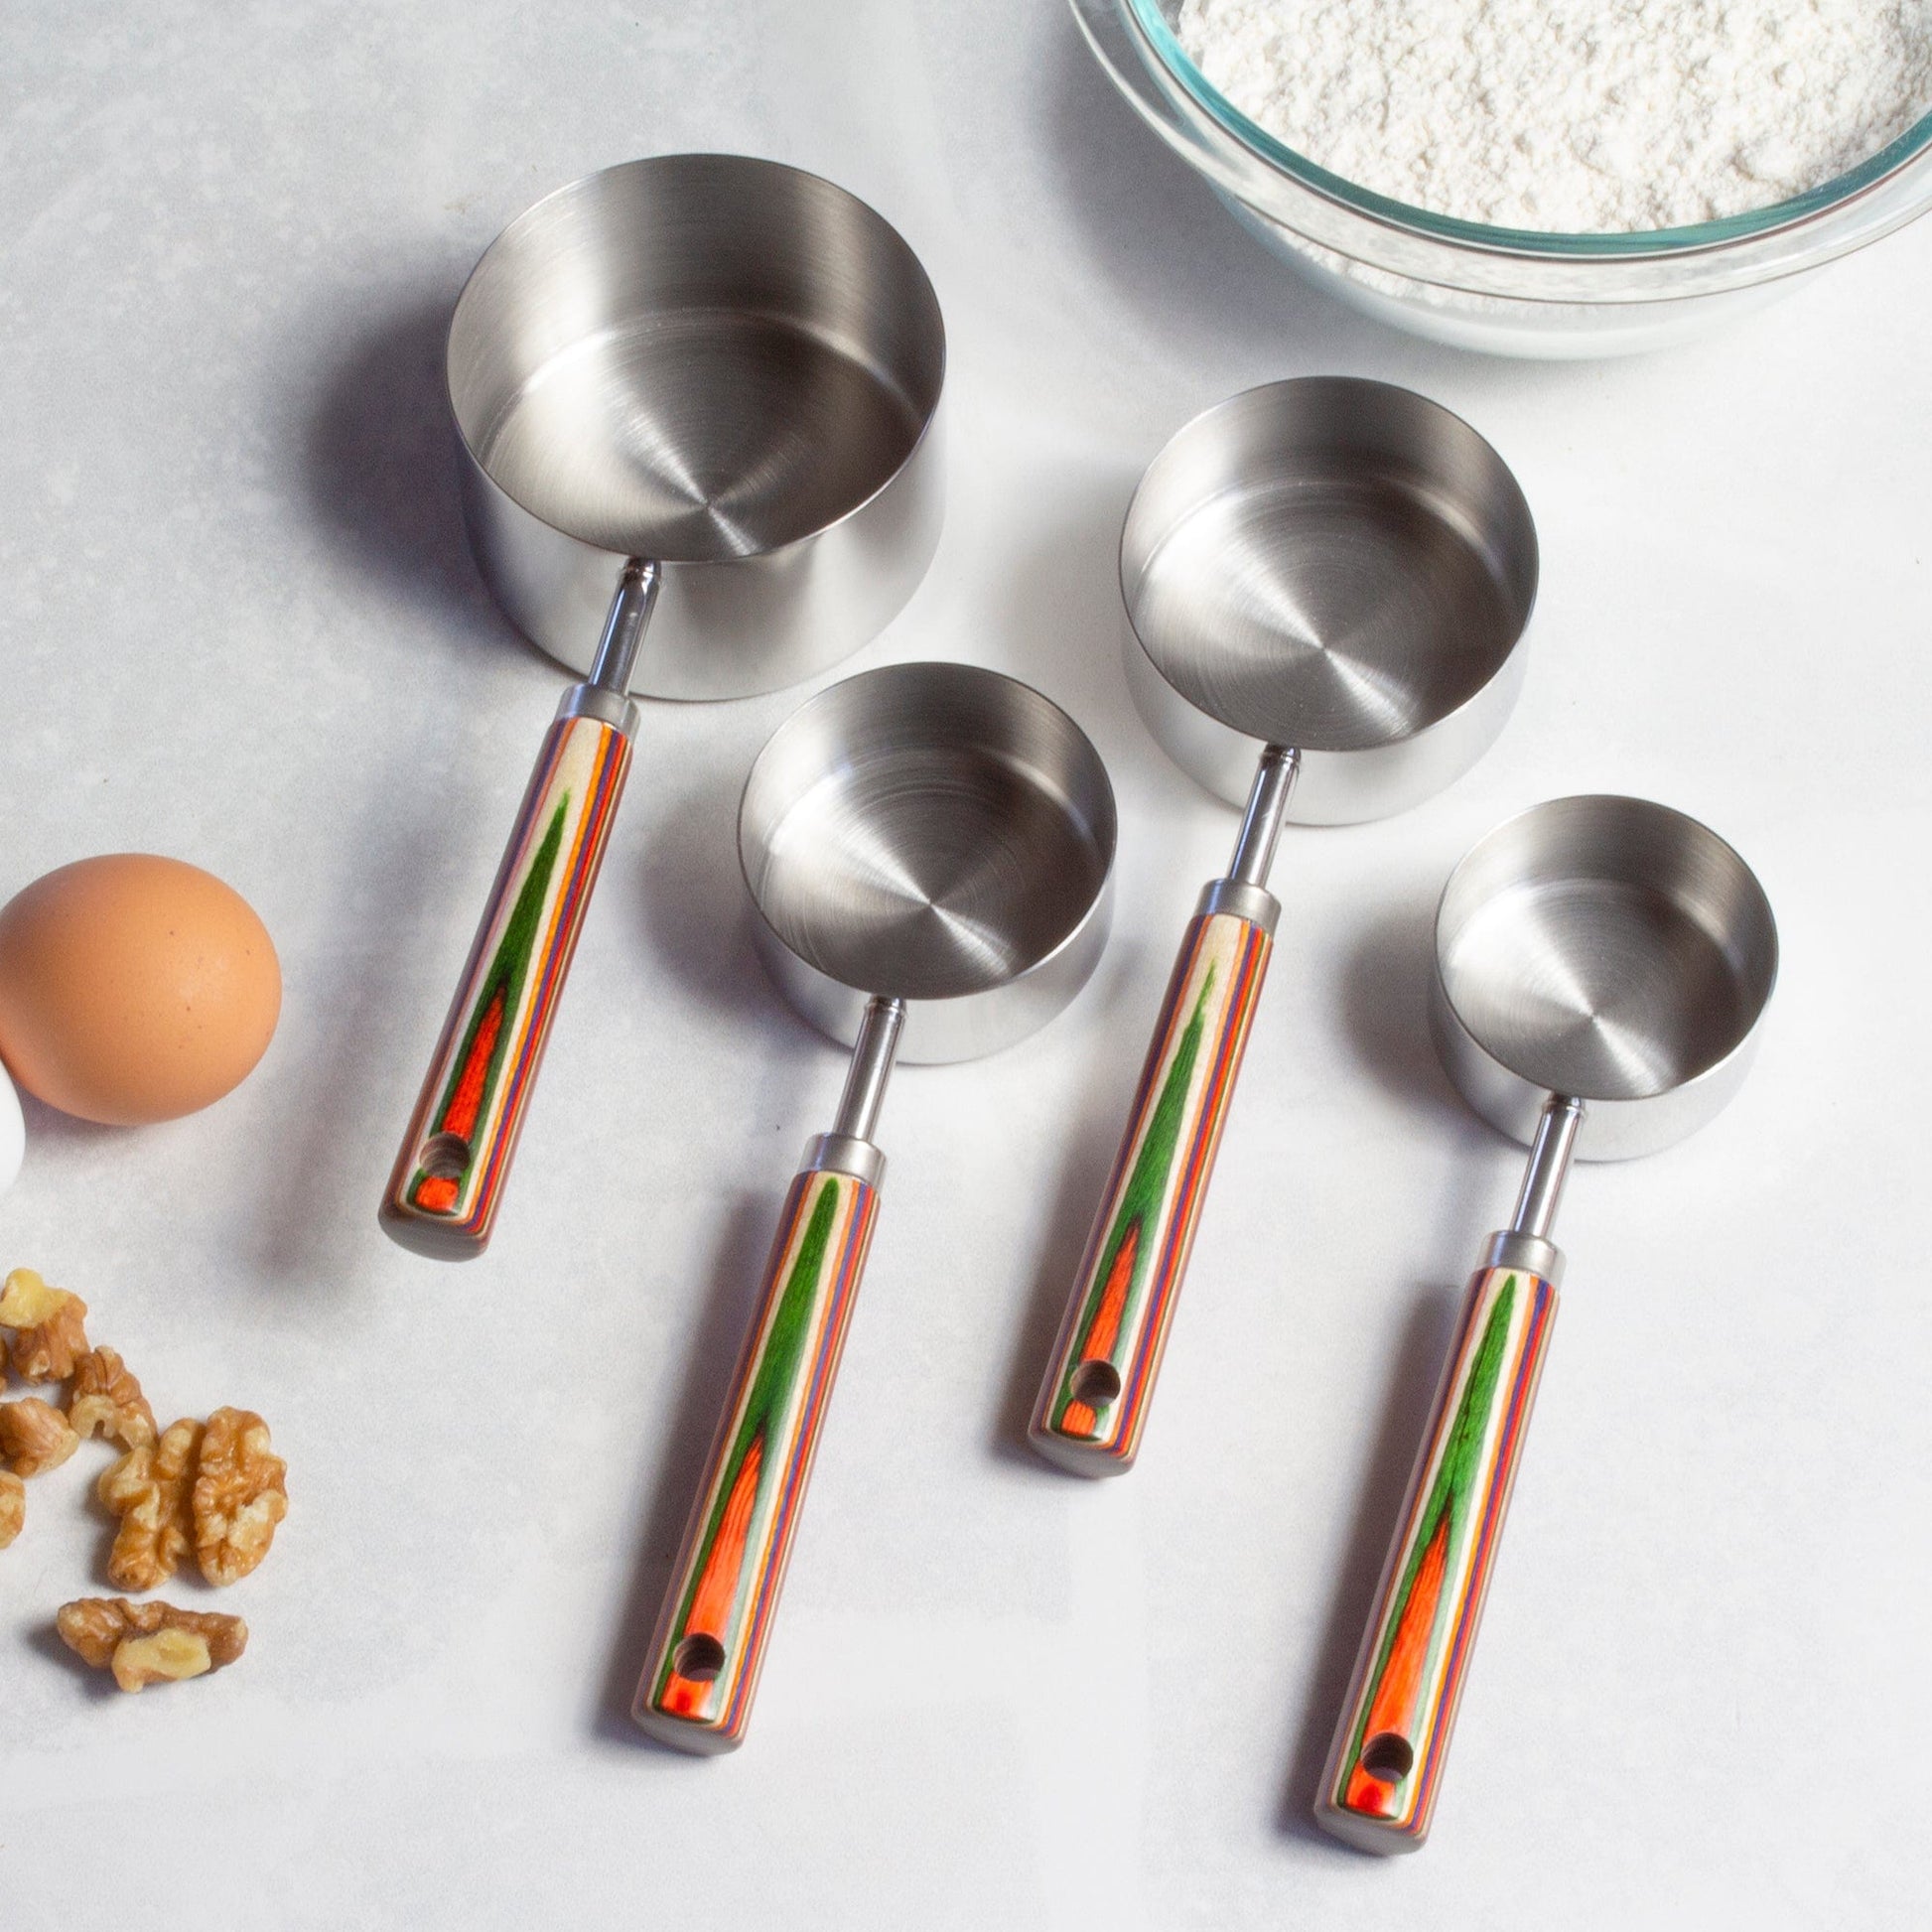 4 sizes of marrakesh measuring cups arranged on a countertop with flour, eggs, and nuts.